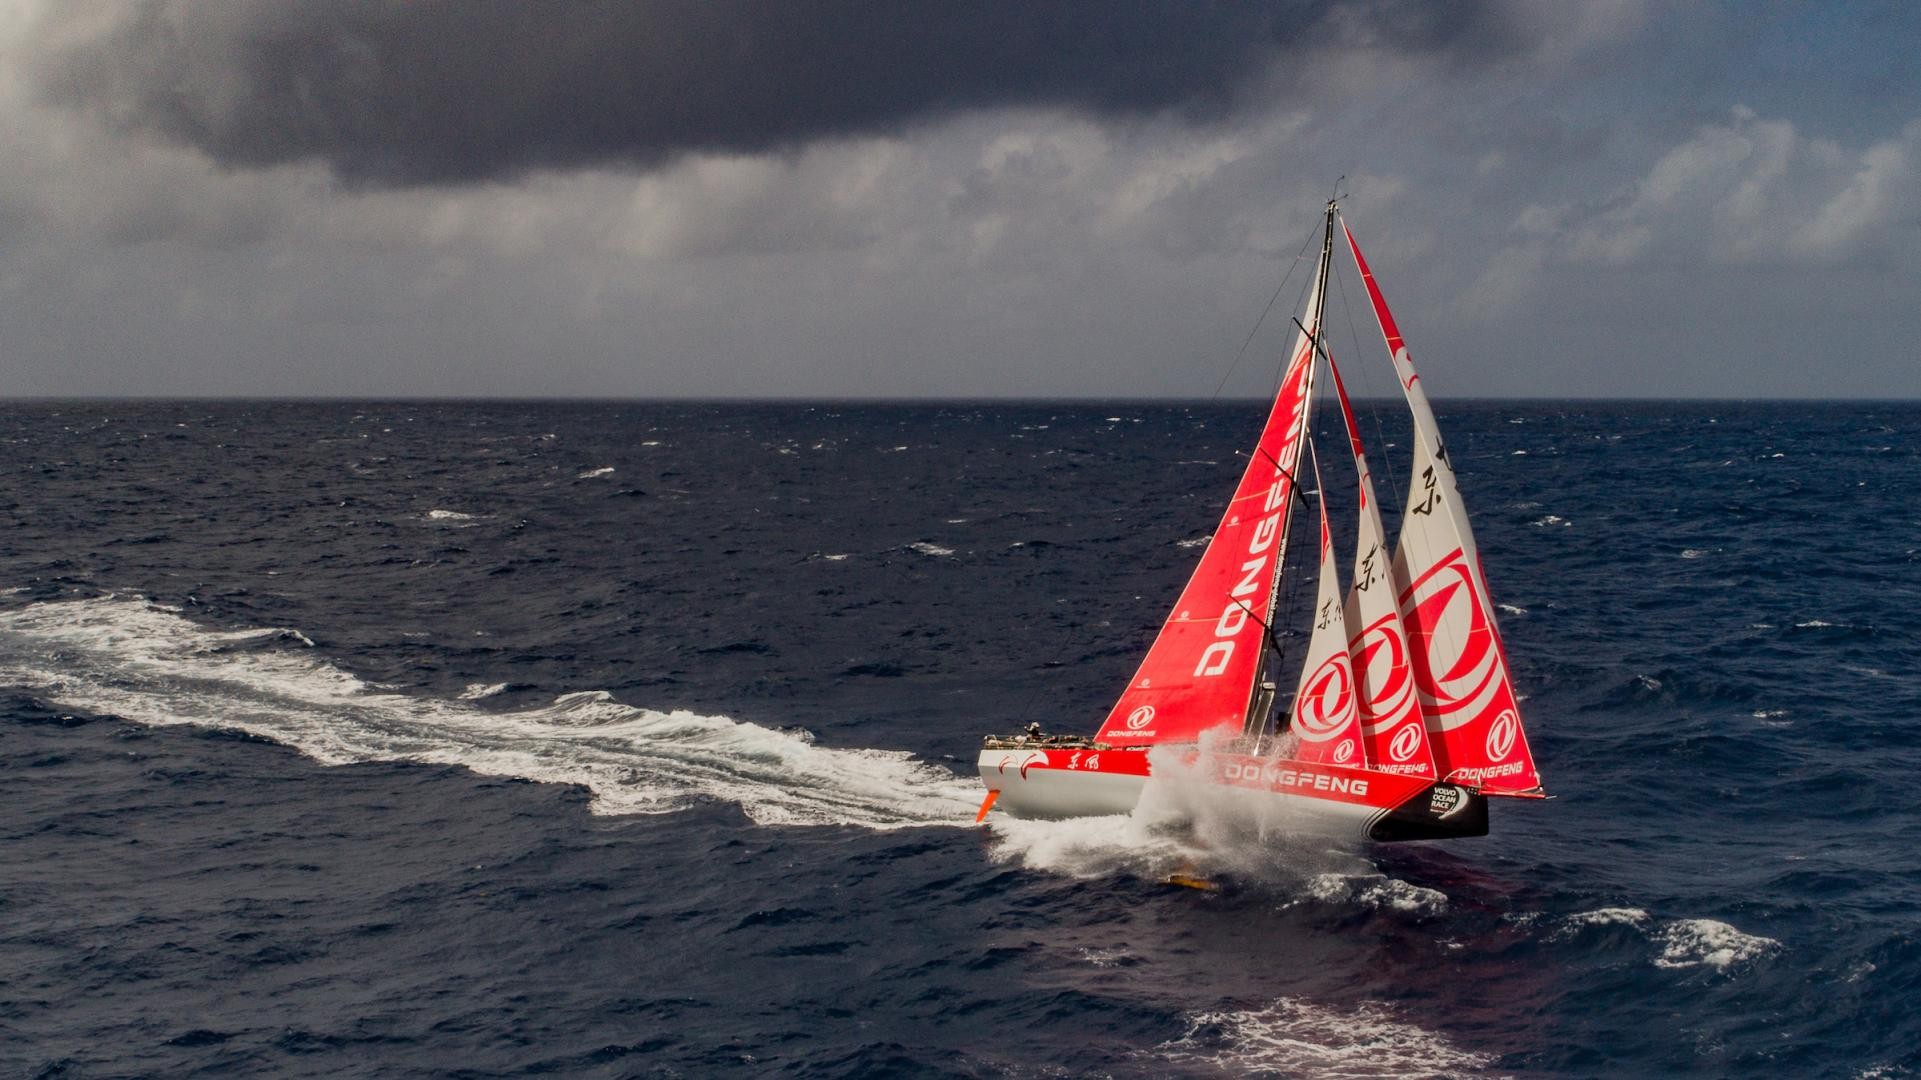 Brunel making a sail change during the 2017-18 edition of the race